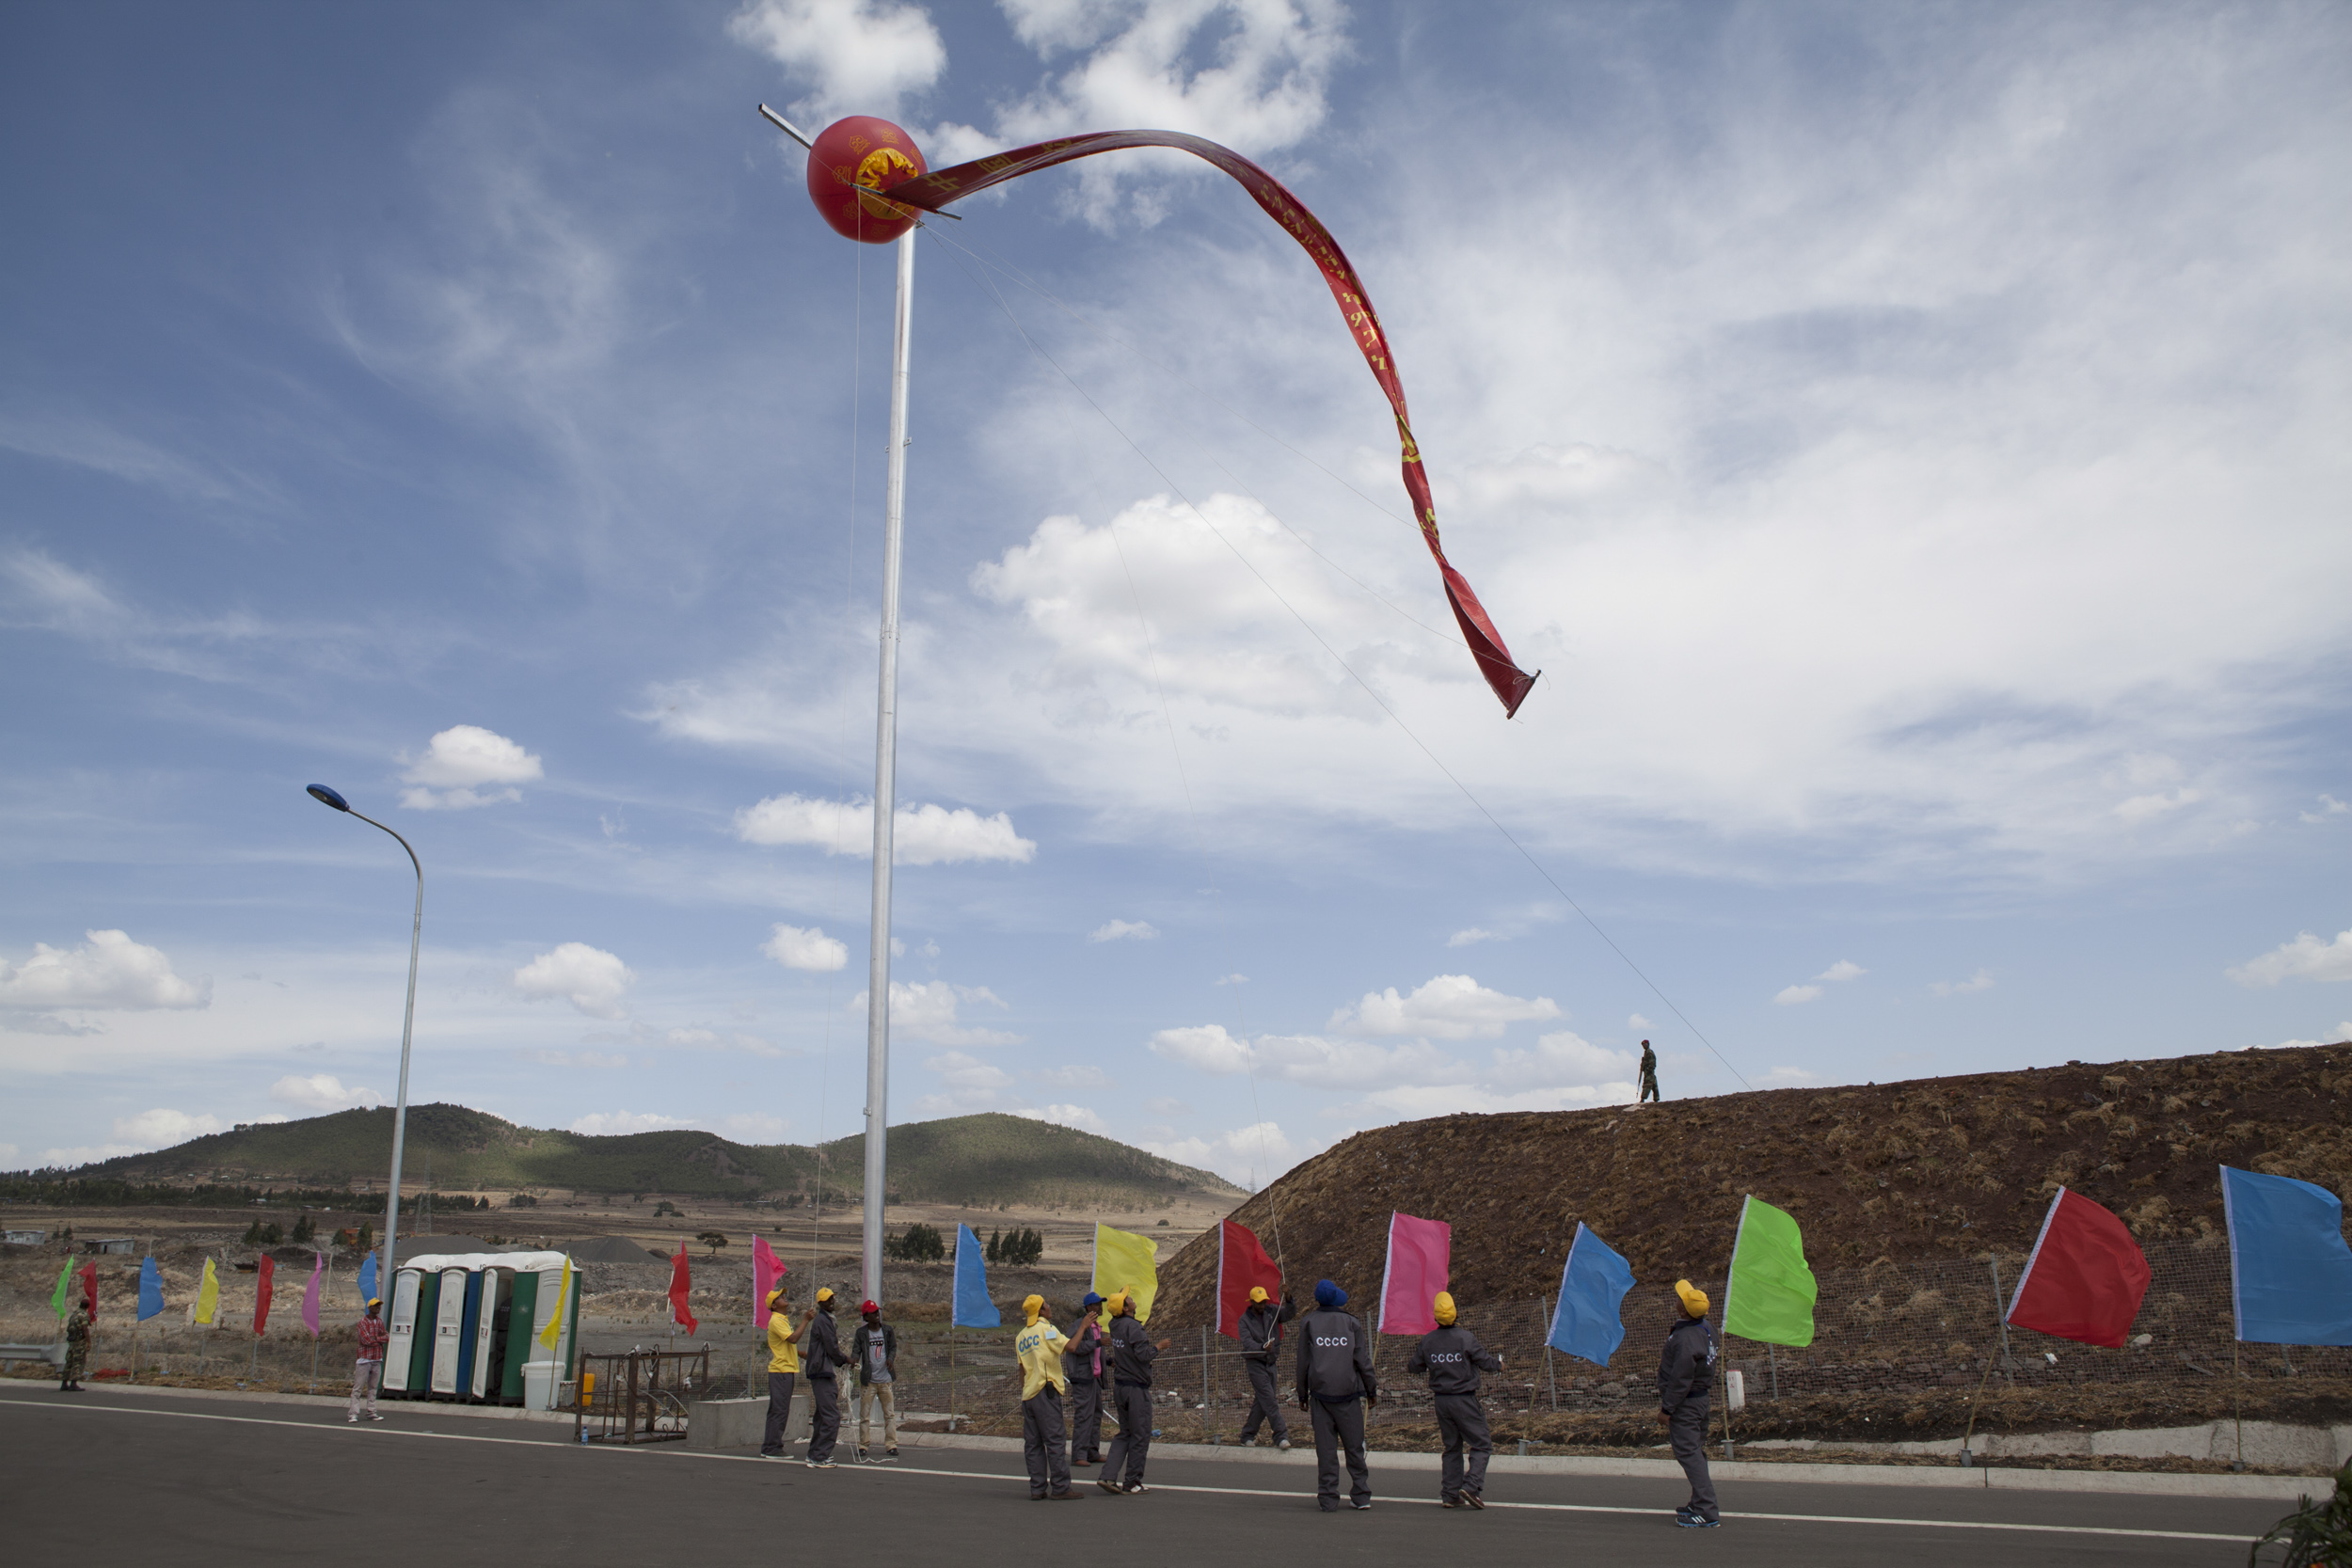   Ethiopian and Chinese workers of the China Communication Construction Company secure a flag at the site of the Addis Ababa-Adama toll road on May 5, 2014. The site was christened by Chinese Prime Minister Li Keqiang. Li arrived in Ethiopia for the 